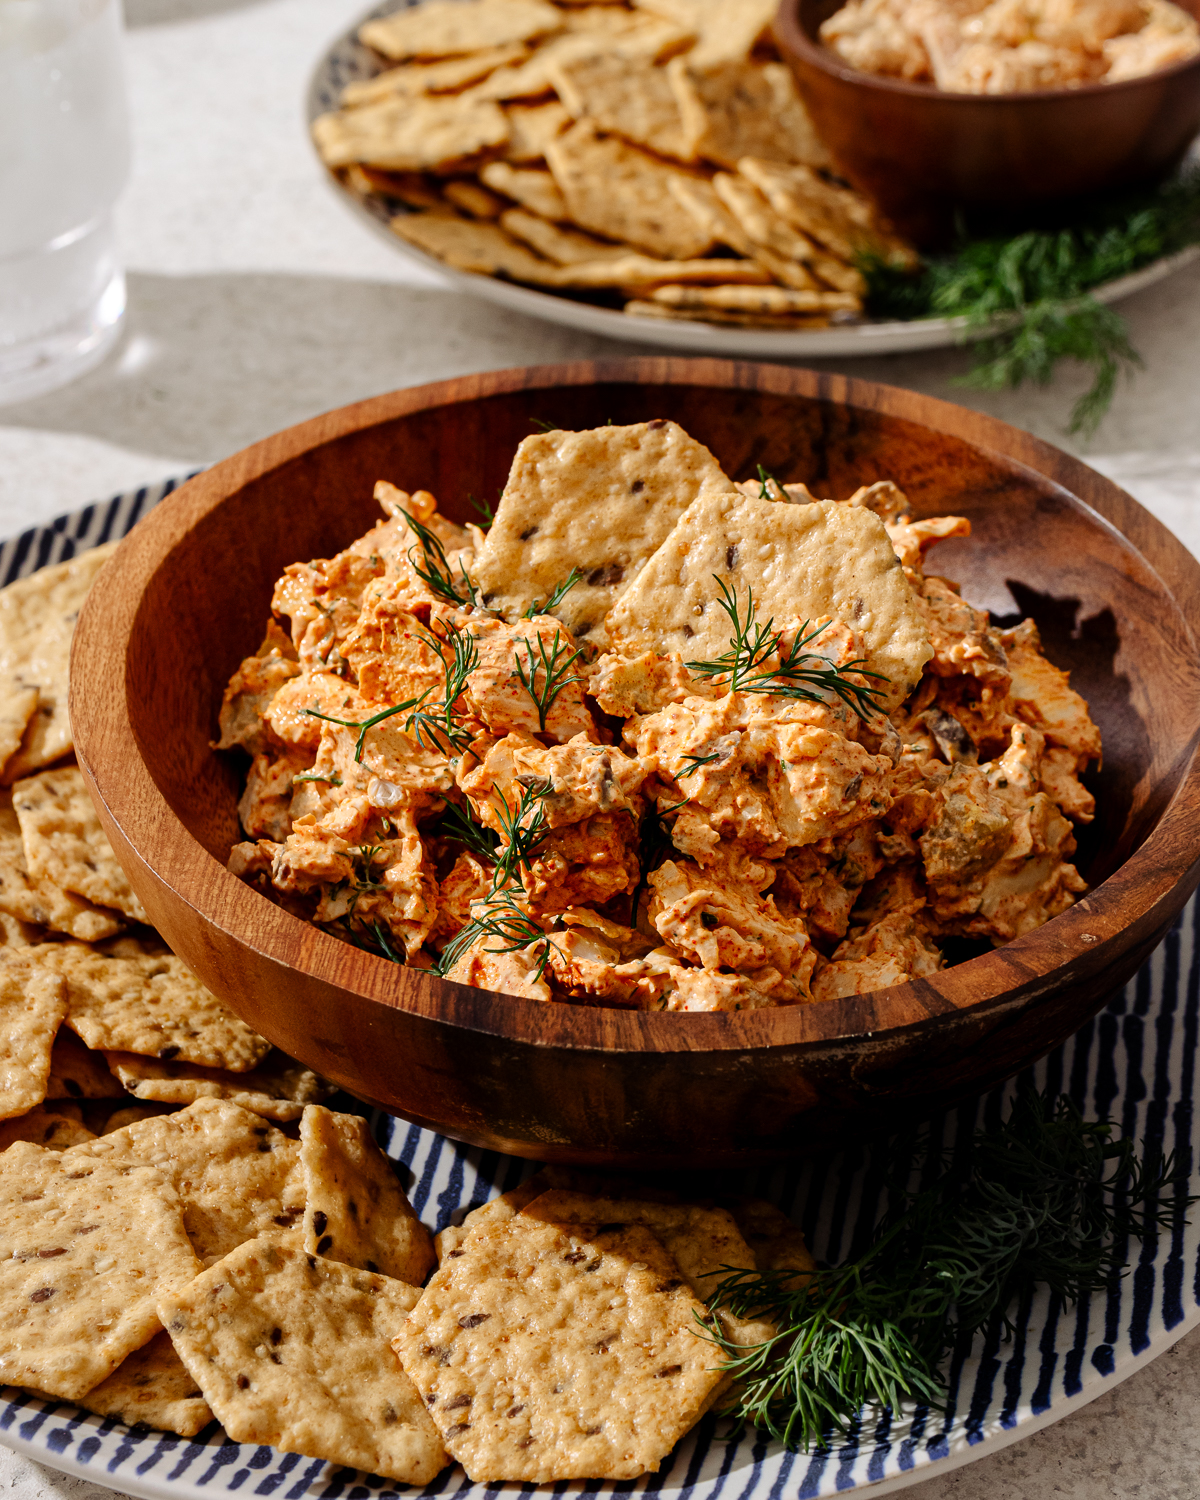 High protein chicken salad in a wooden bowl with crackers and garnish.